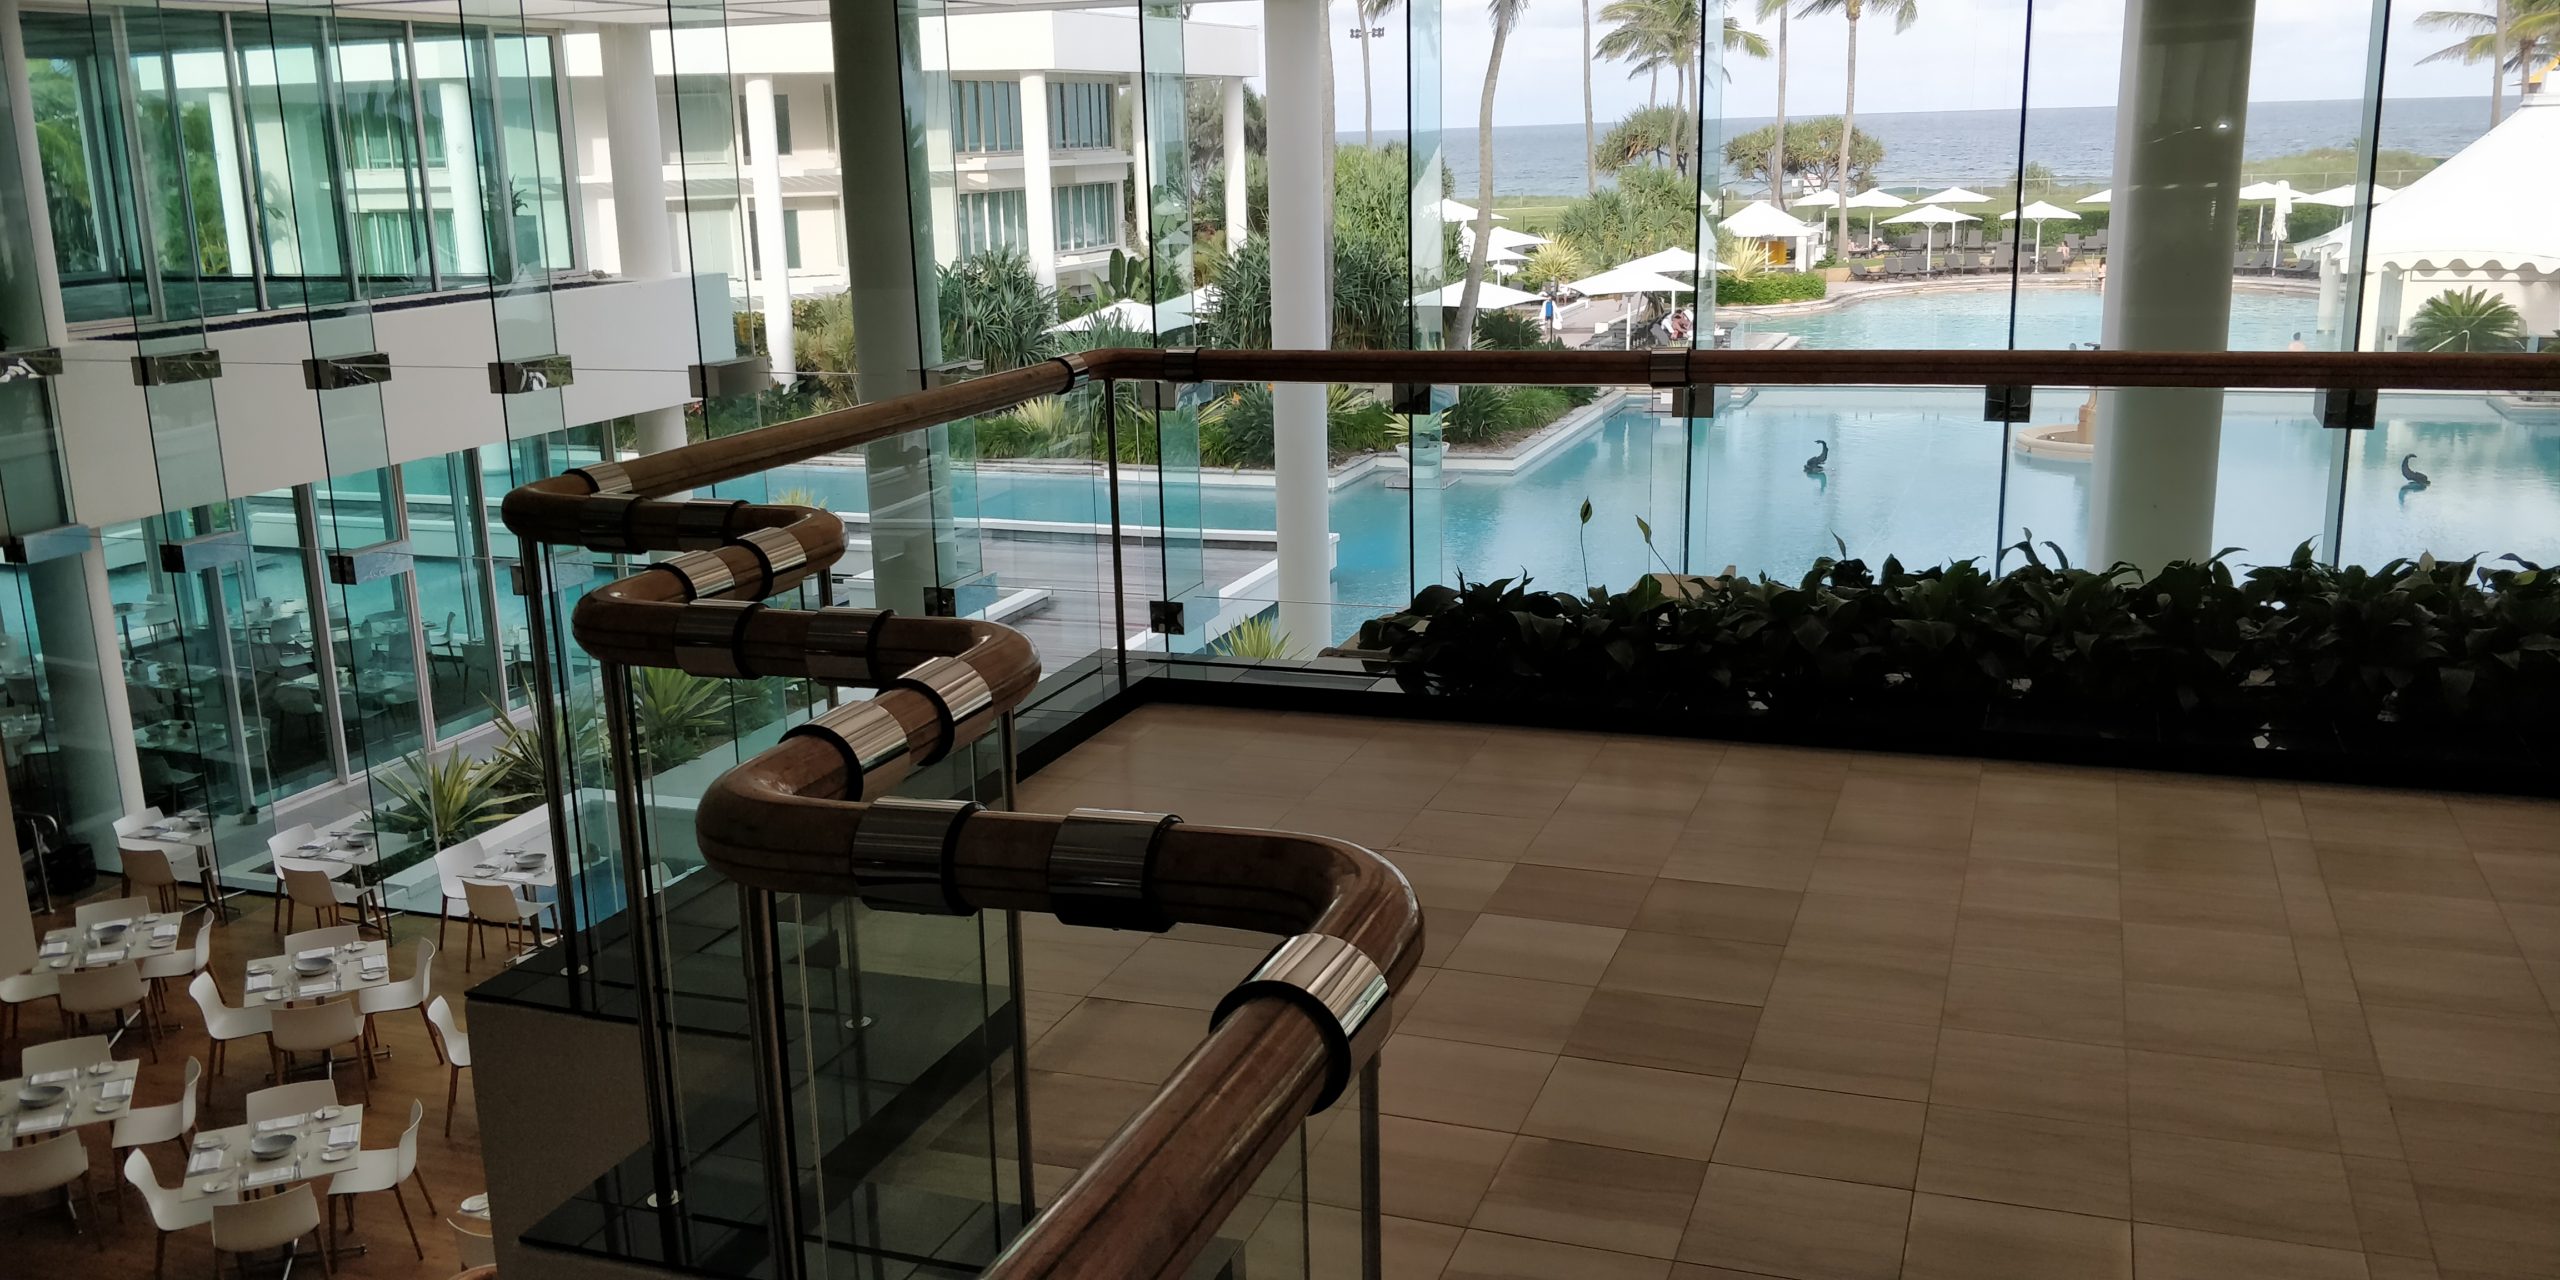 Review the Grand Mirage Resort picture of the view from the indoor observation deck